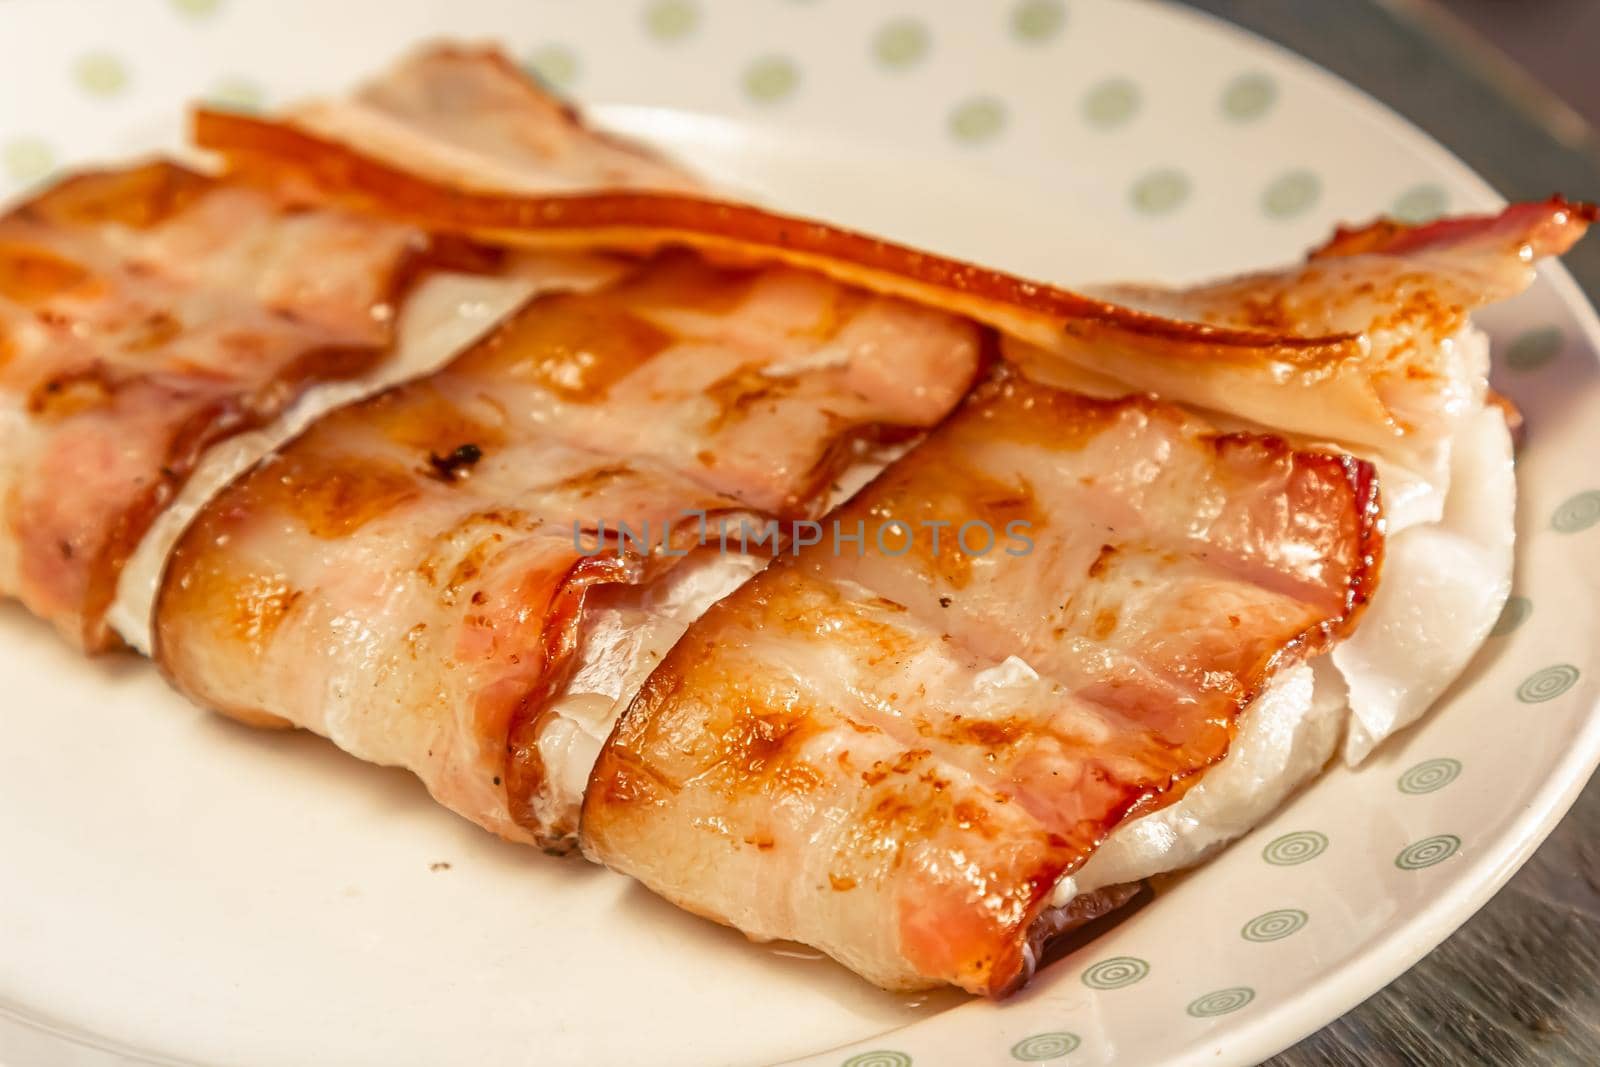 Cod fish wrapped in bacon.